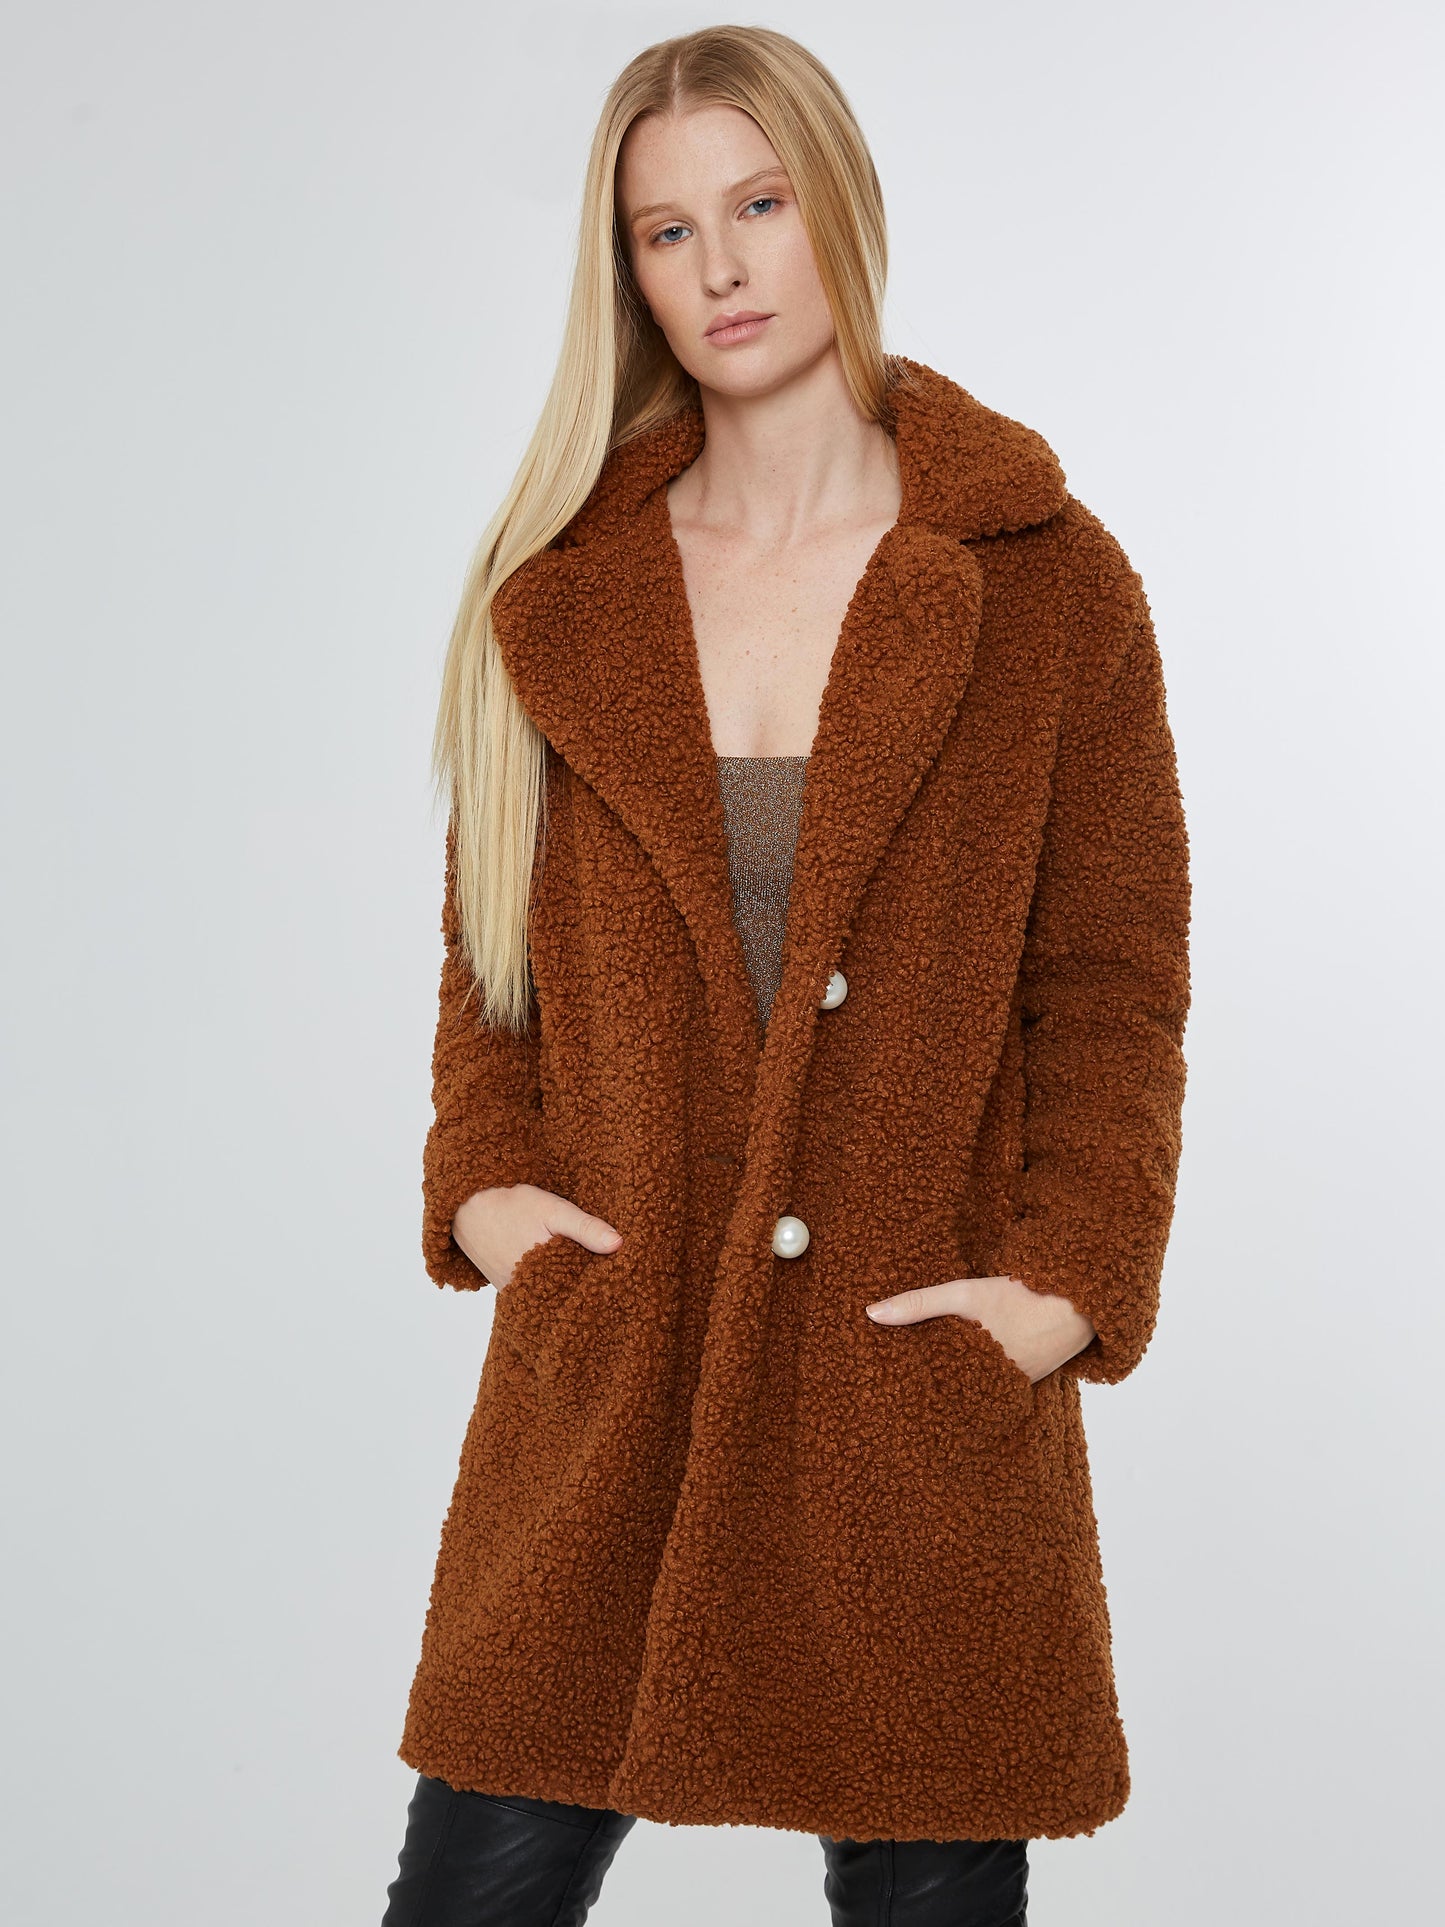 Chocolate brown faux shearling coat with pearl buttons